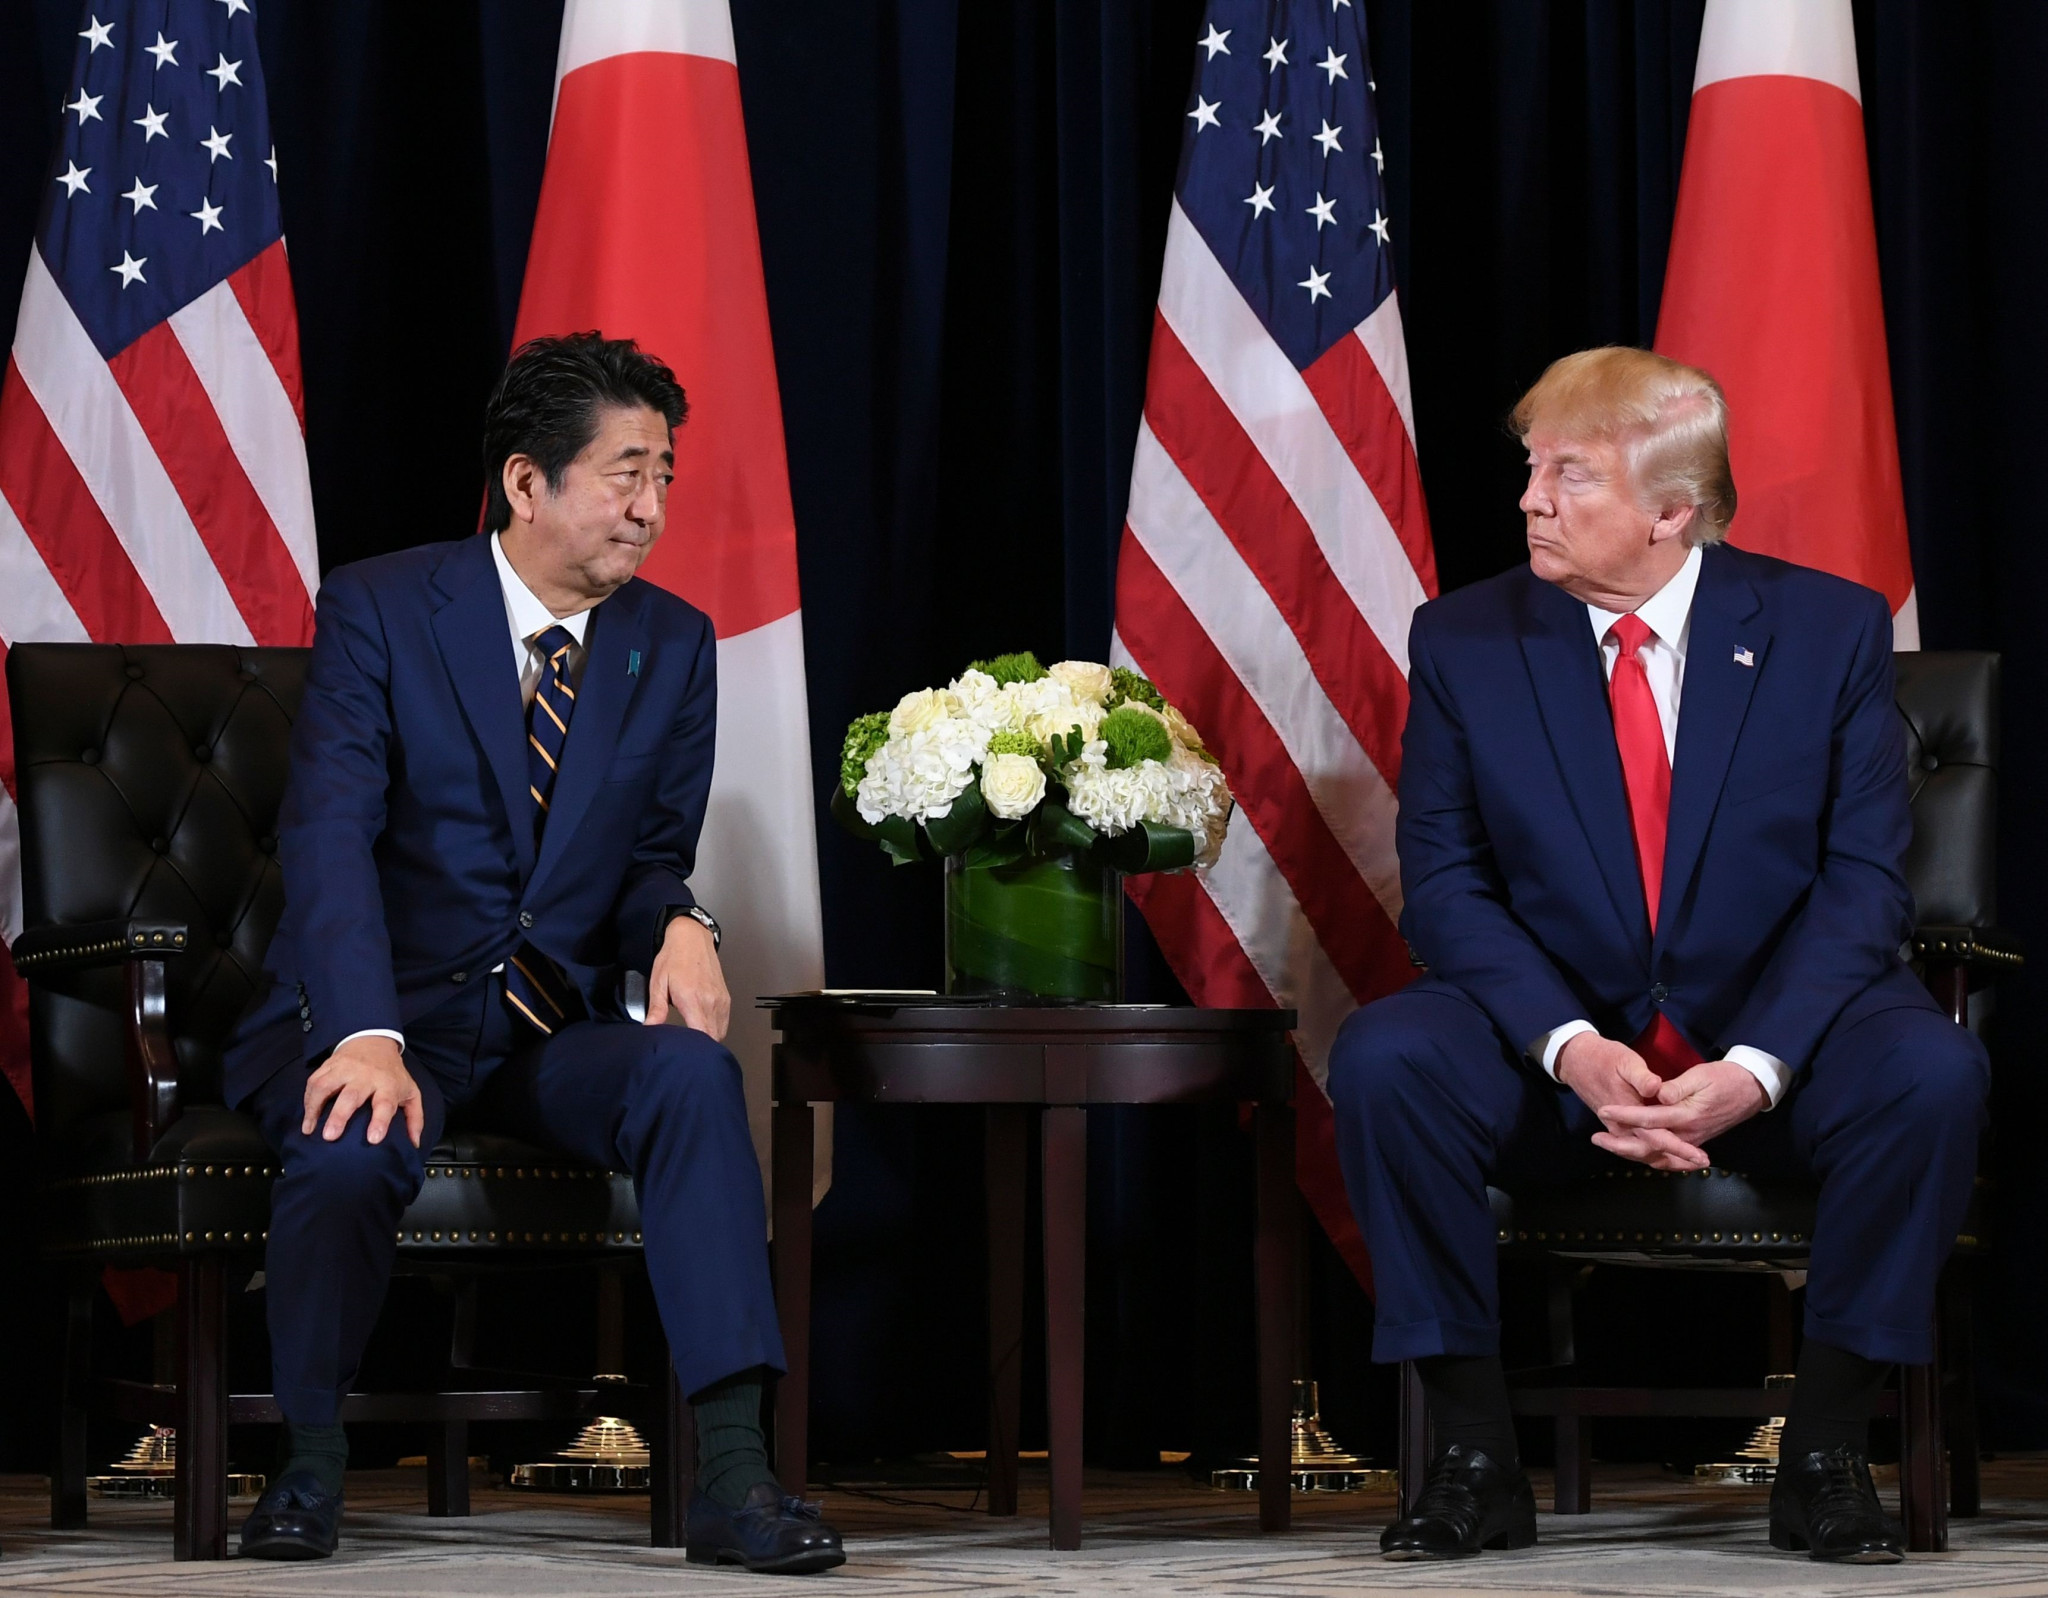 United States President Donald Trump has expressed his support for Japanese Prime Minister Shinzō Abe over the postponement of Tokyo 2020 ©Getty Images